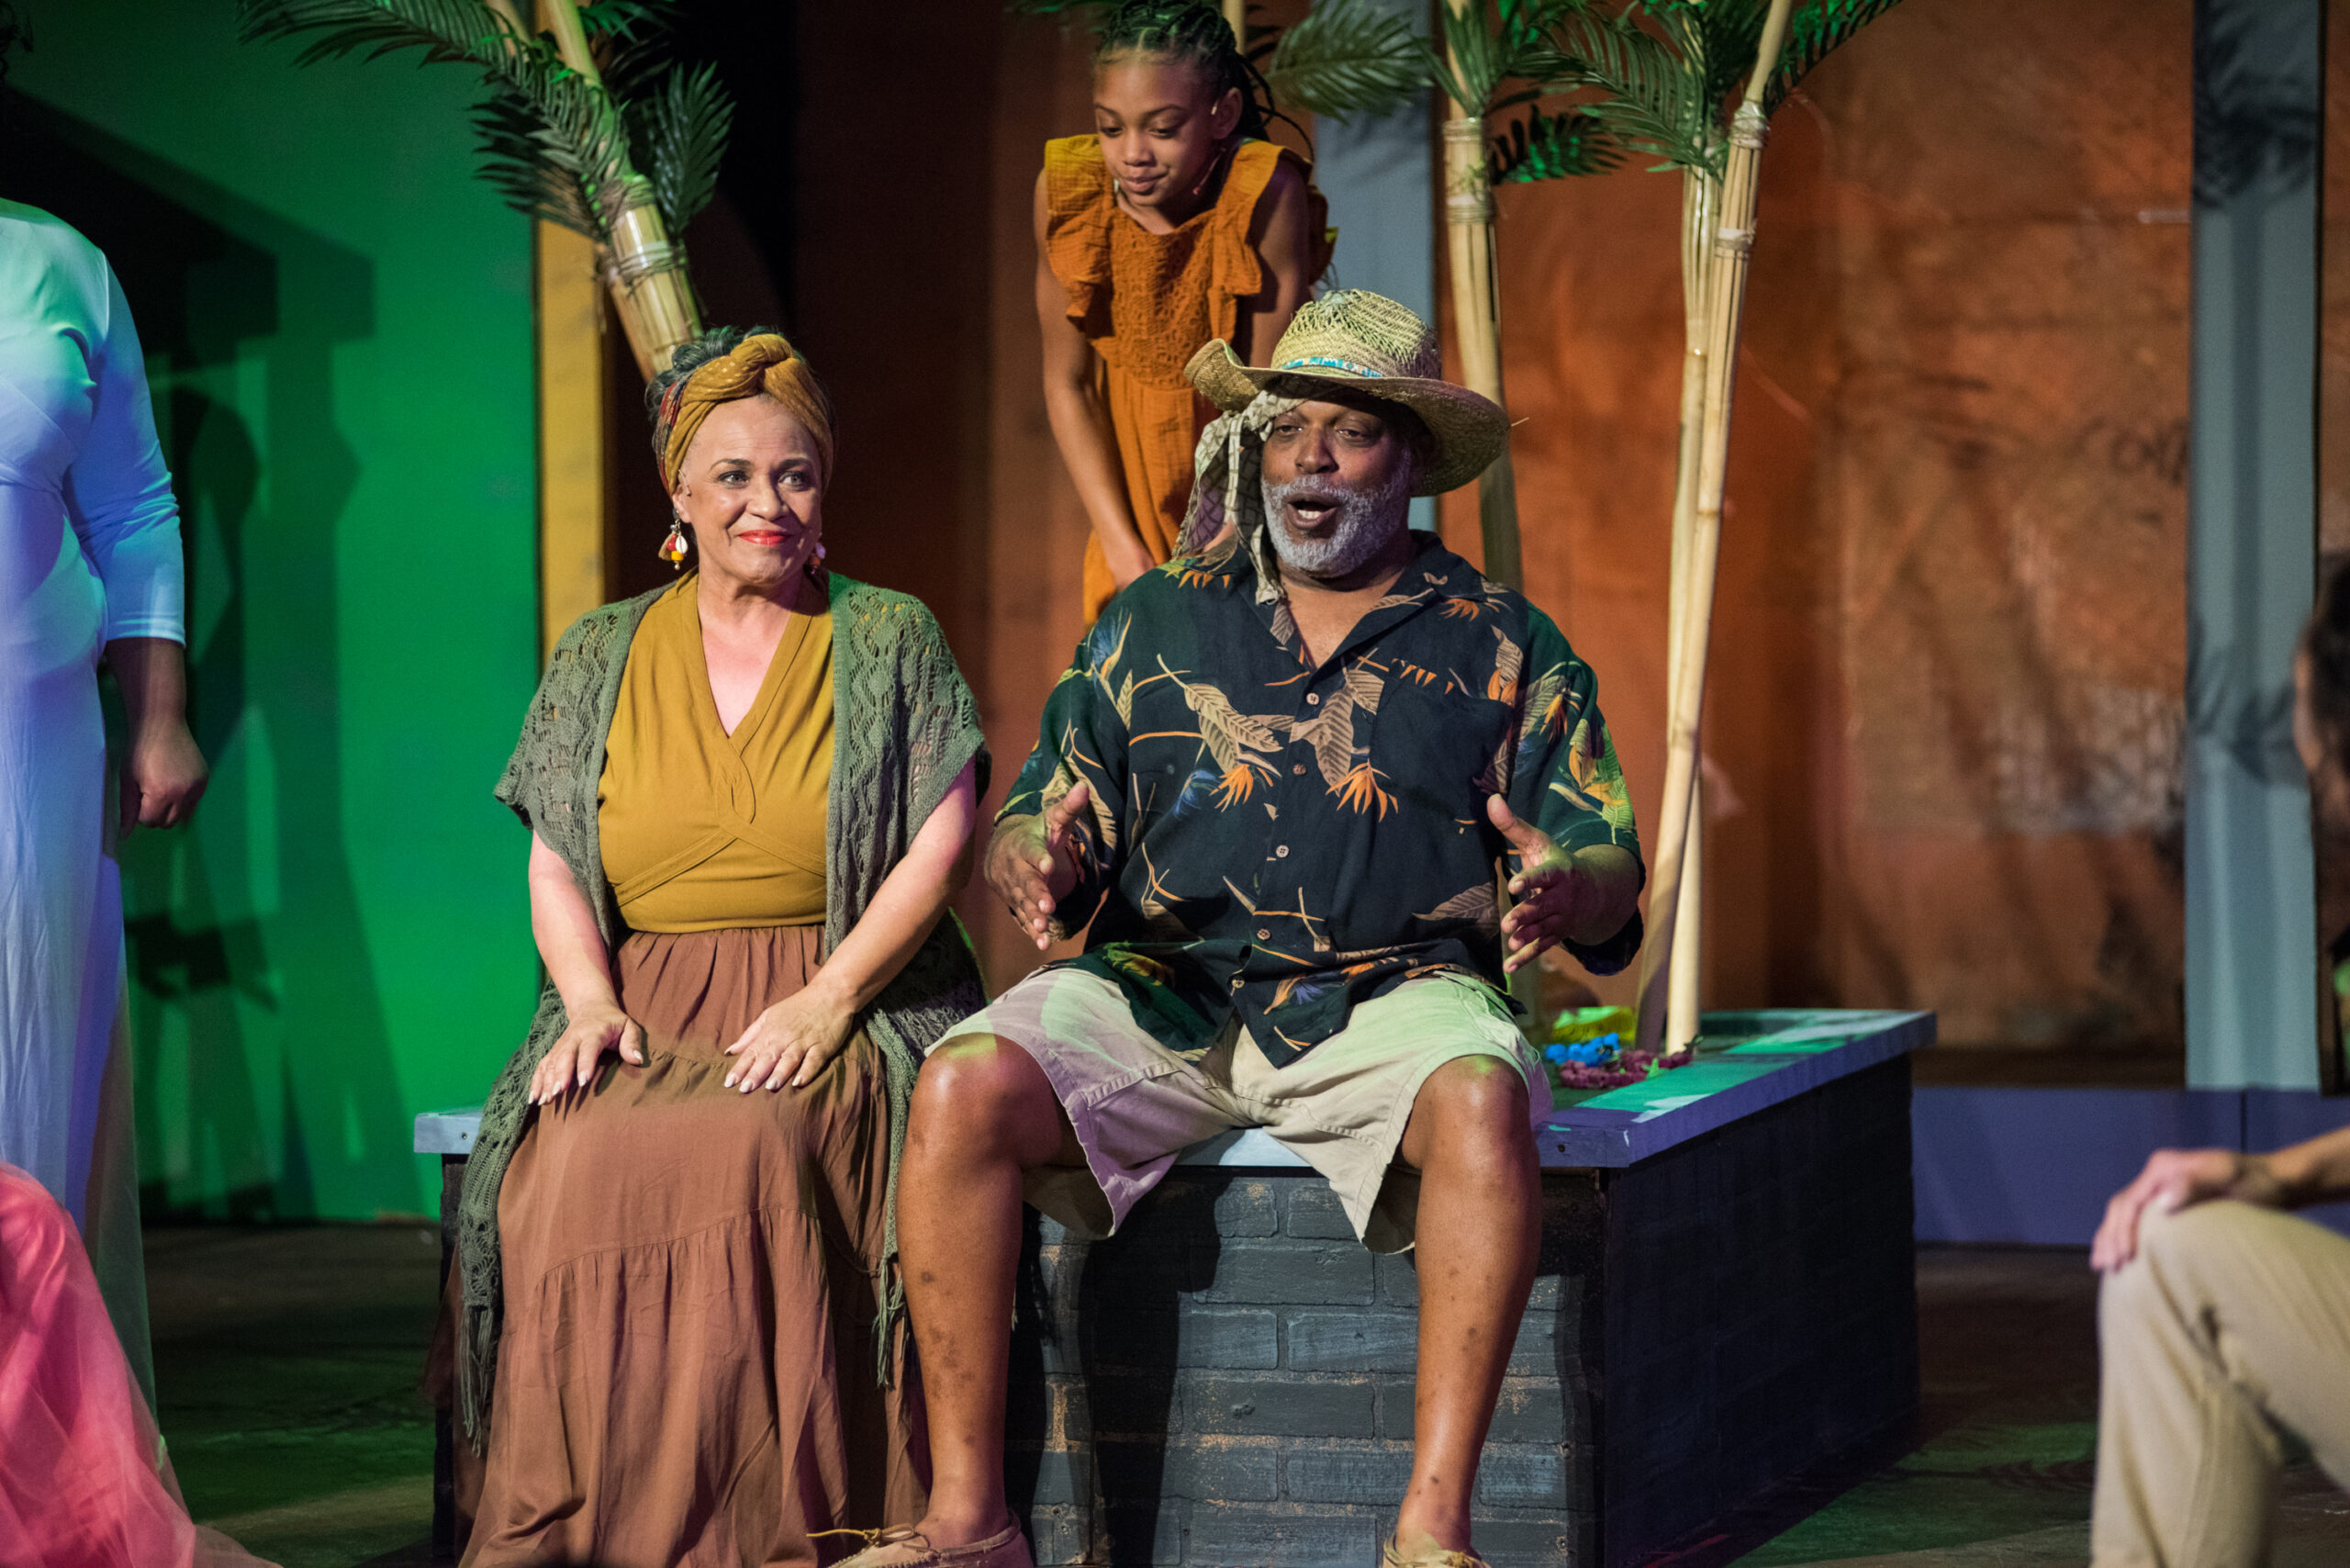 Mama Eulalie (Sheila Kinnard) and Tonton Julian (Robert Barnes) at the conclusion of the story (📷: Jerry Fritchman)